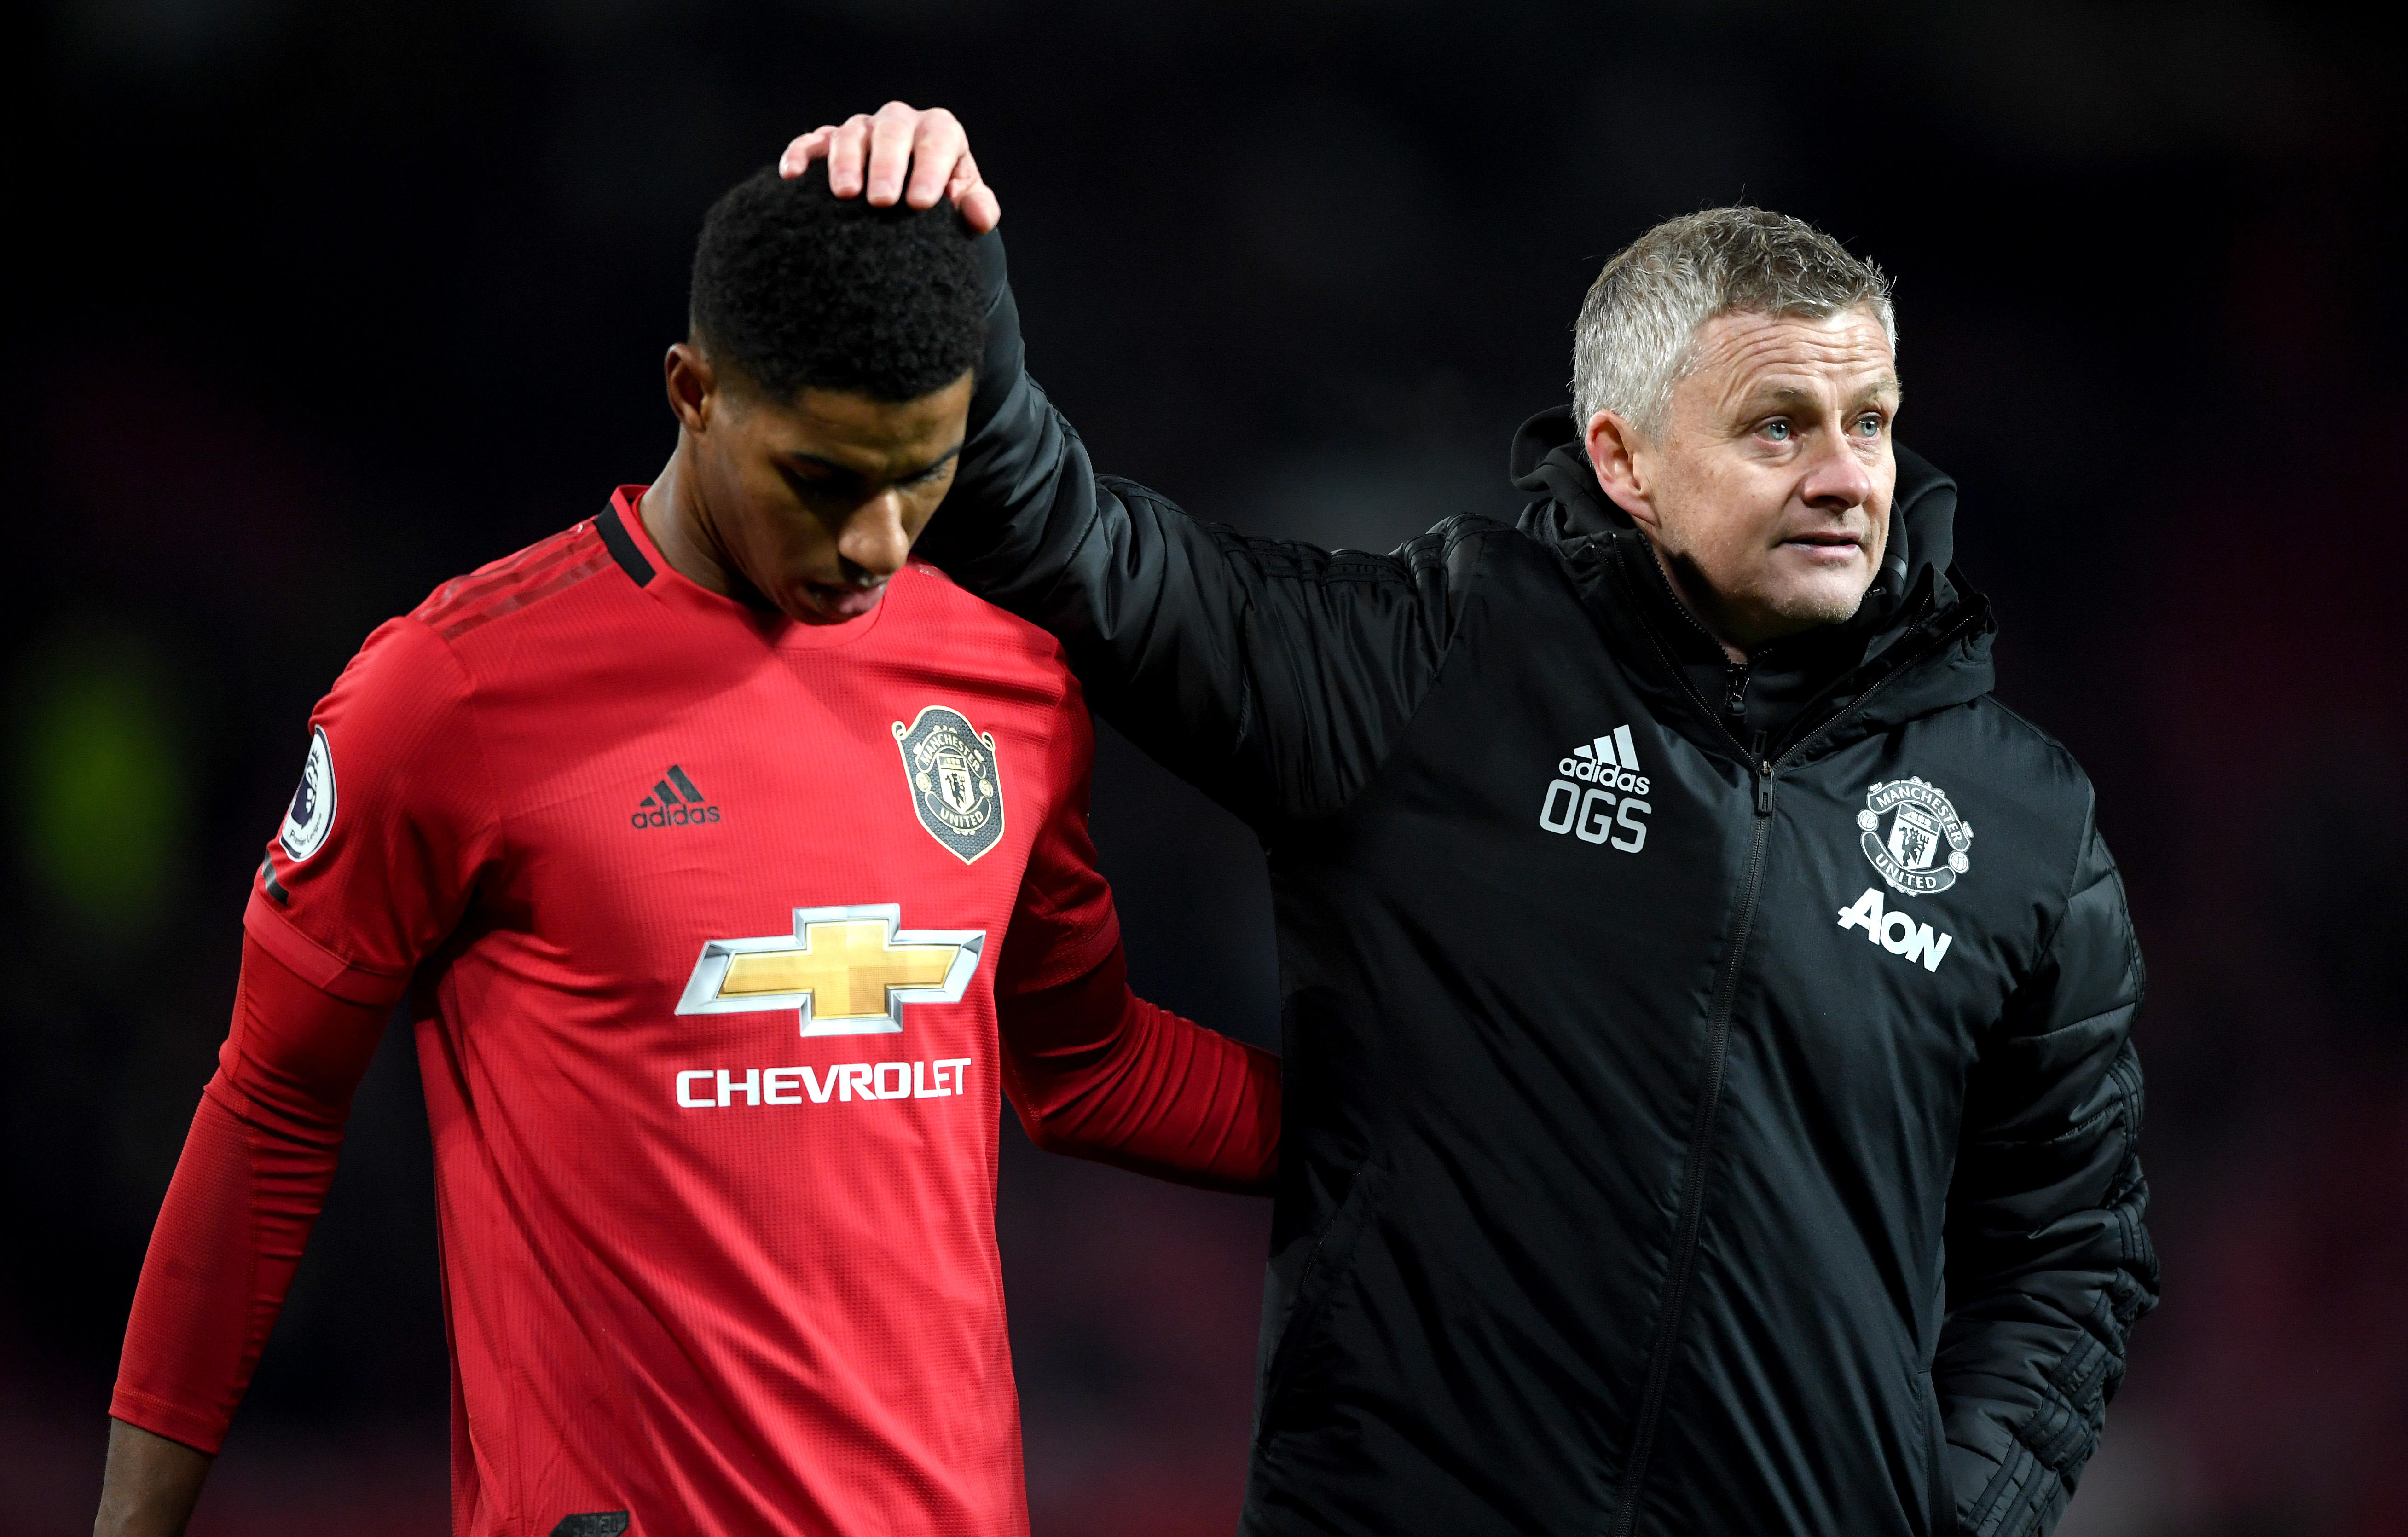 Ole Gunnar Solskjaer is sweating over the fitness of Marcus Rashford. (Photo by Stu Forster/Getty Images)